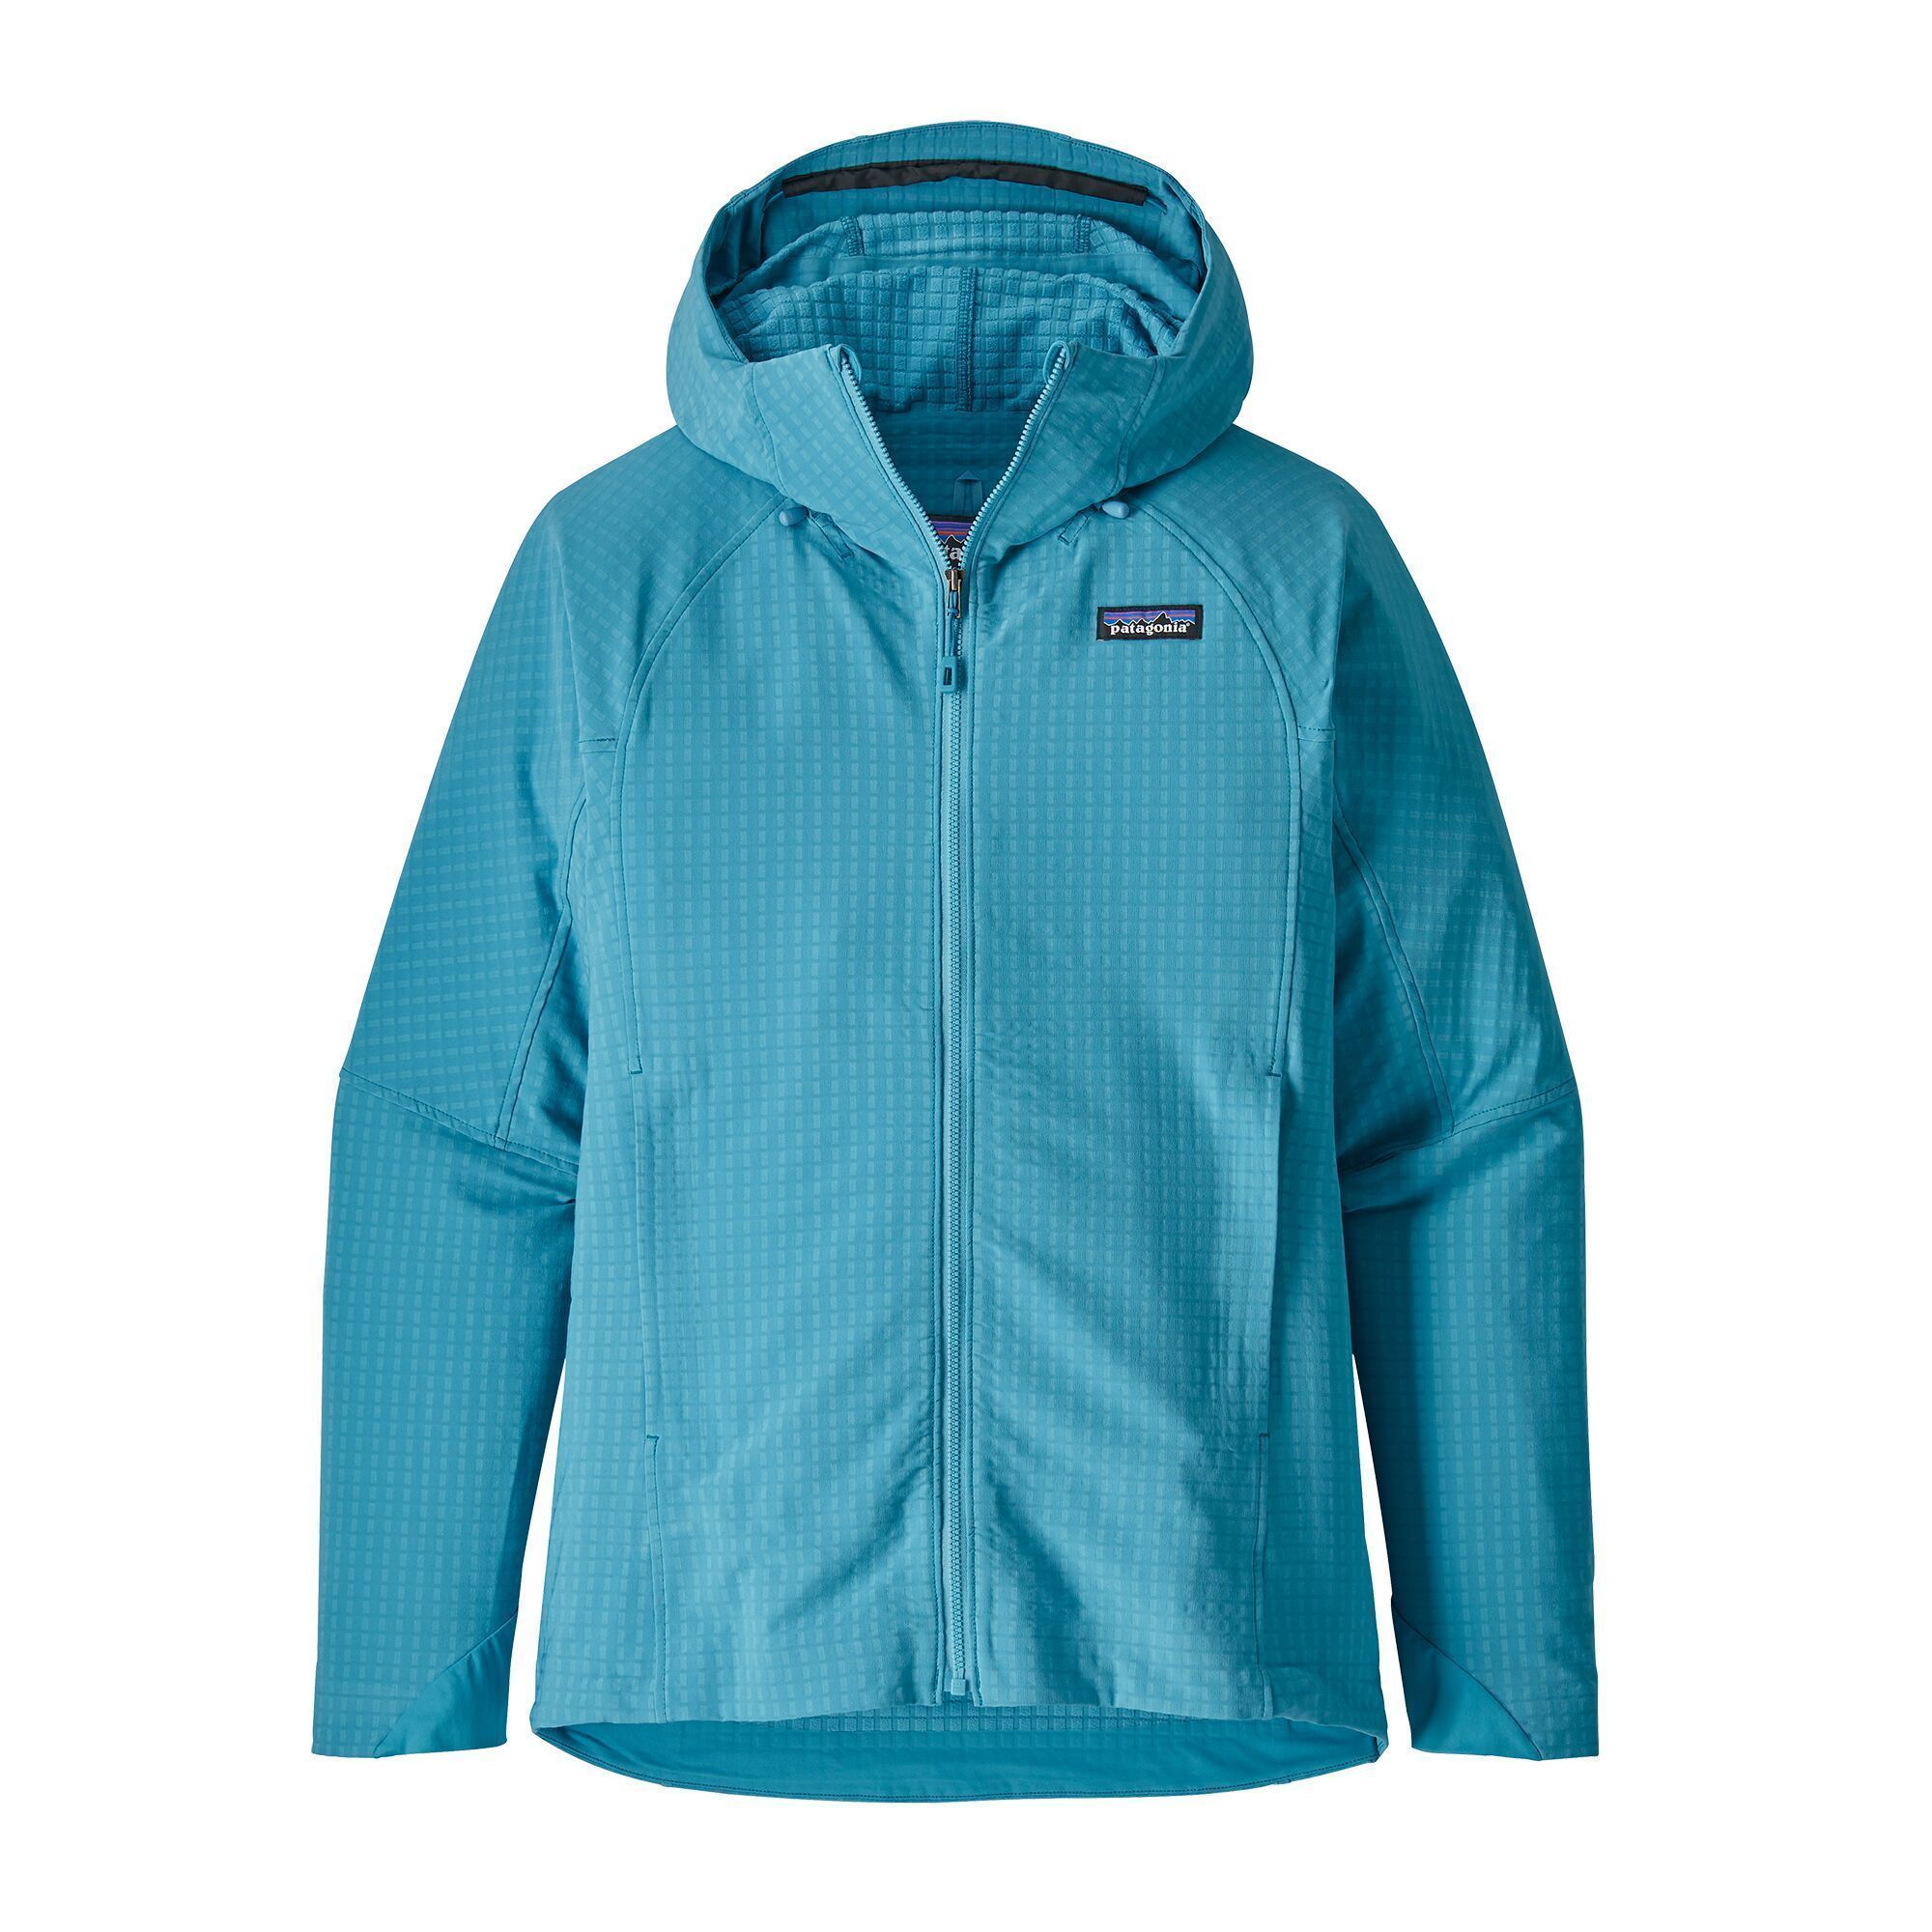 Patagonia Women's R1 TechFace Hoody - Recycled Polyester, Mako Blue / M